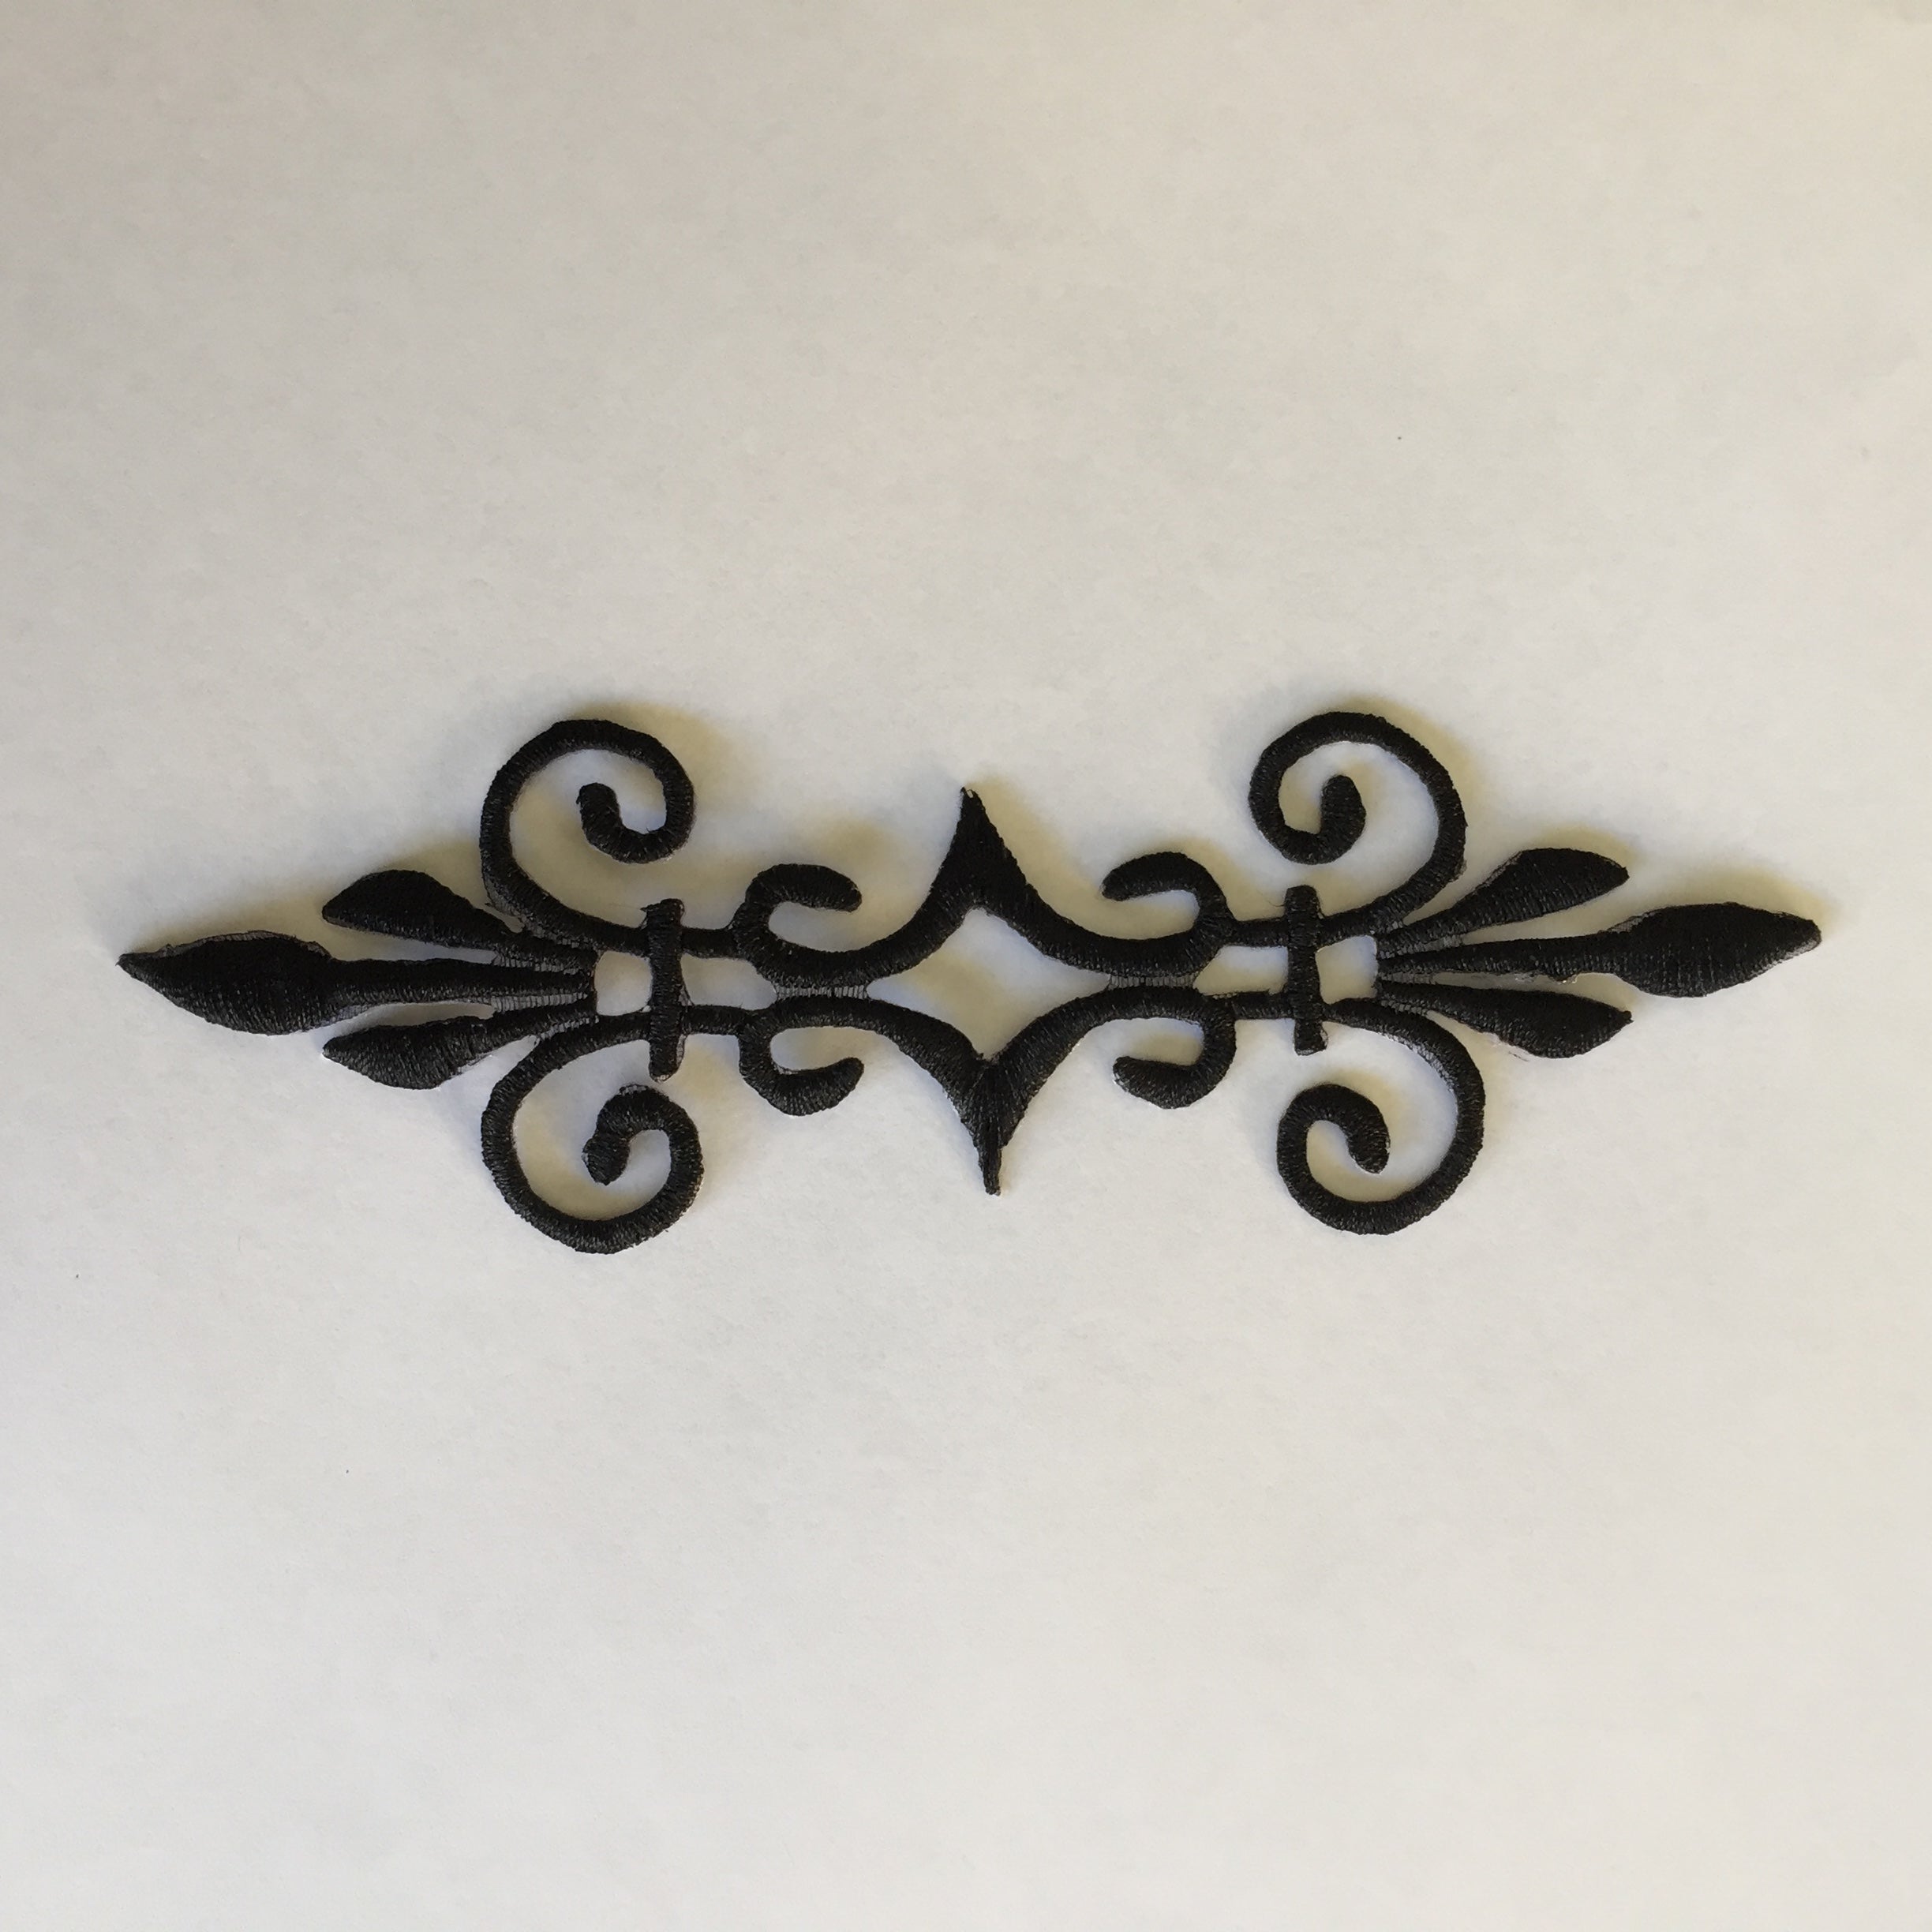 Embroidered black scroll applique for decorating cosplay costumes and ballet and dance costumes.